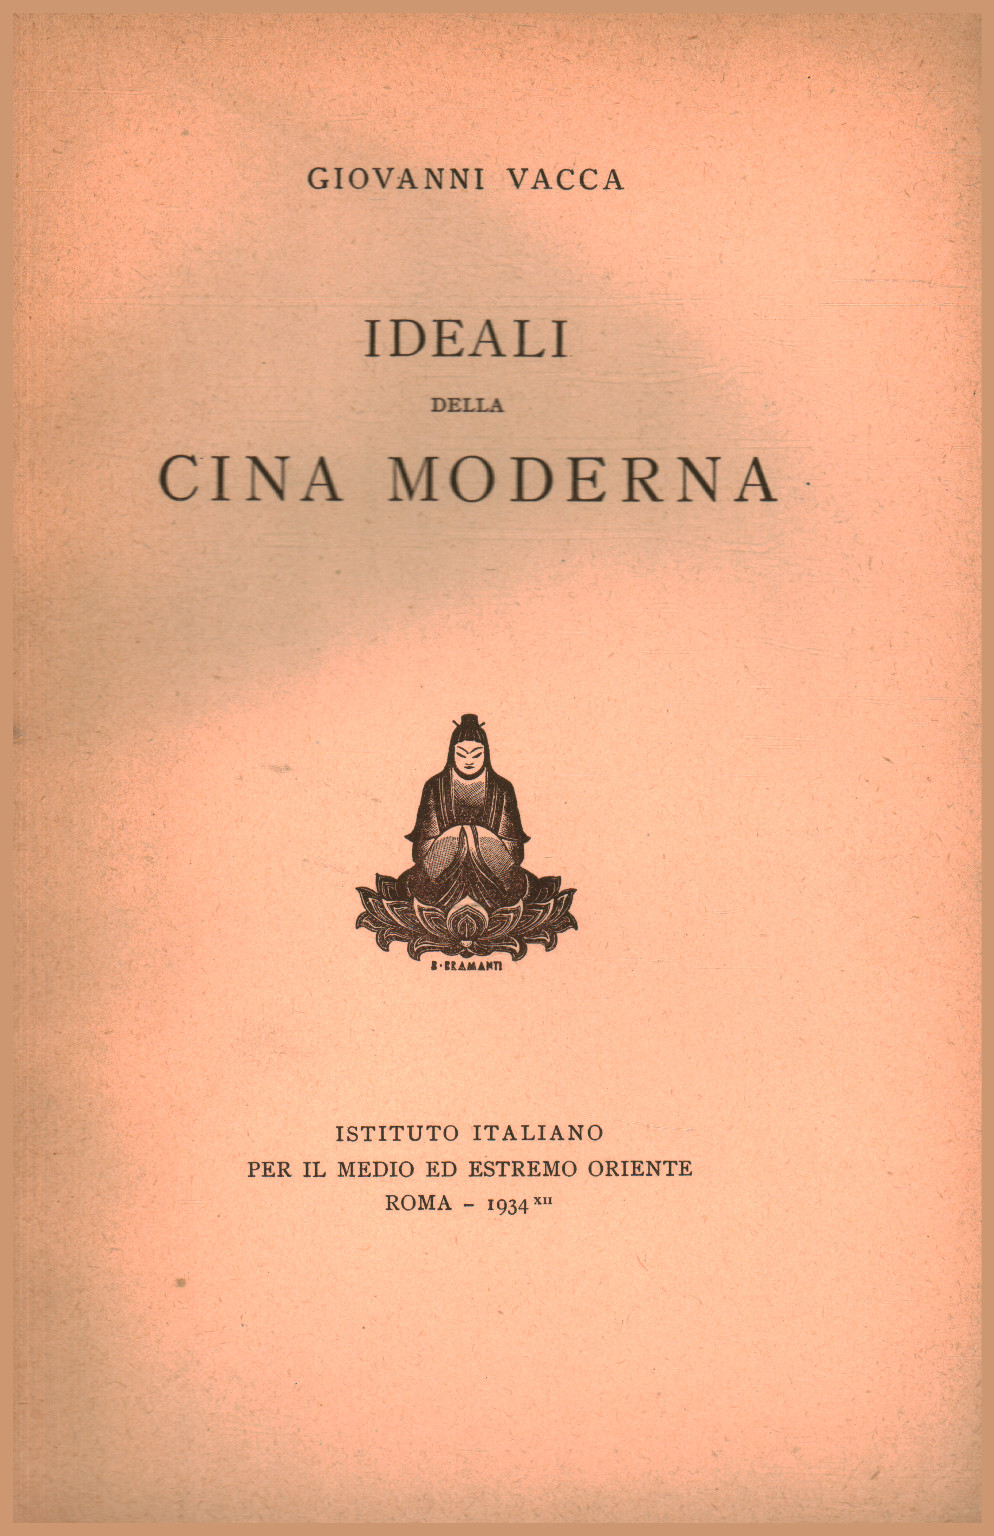 Ideals of modern China, Giovanni Vacca